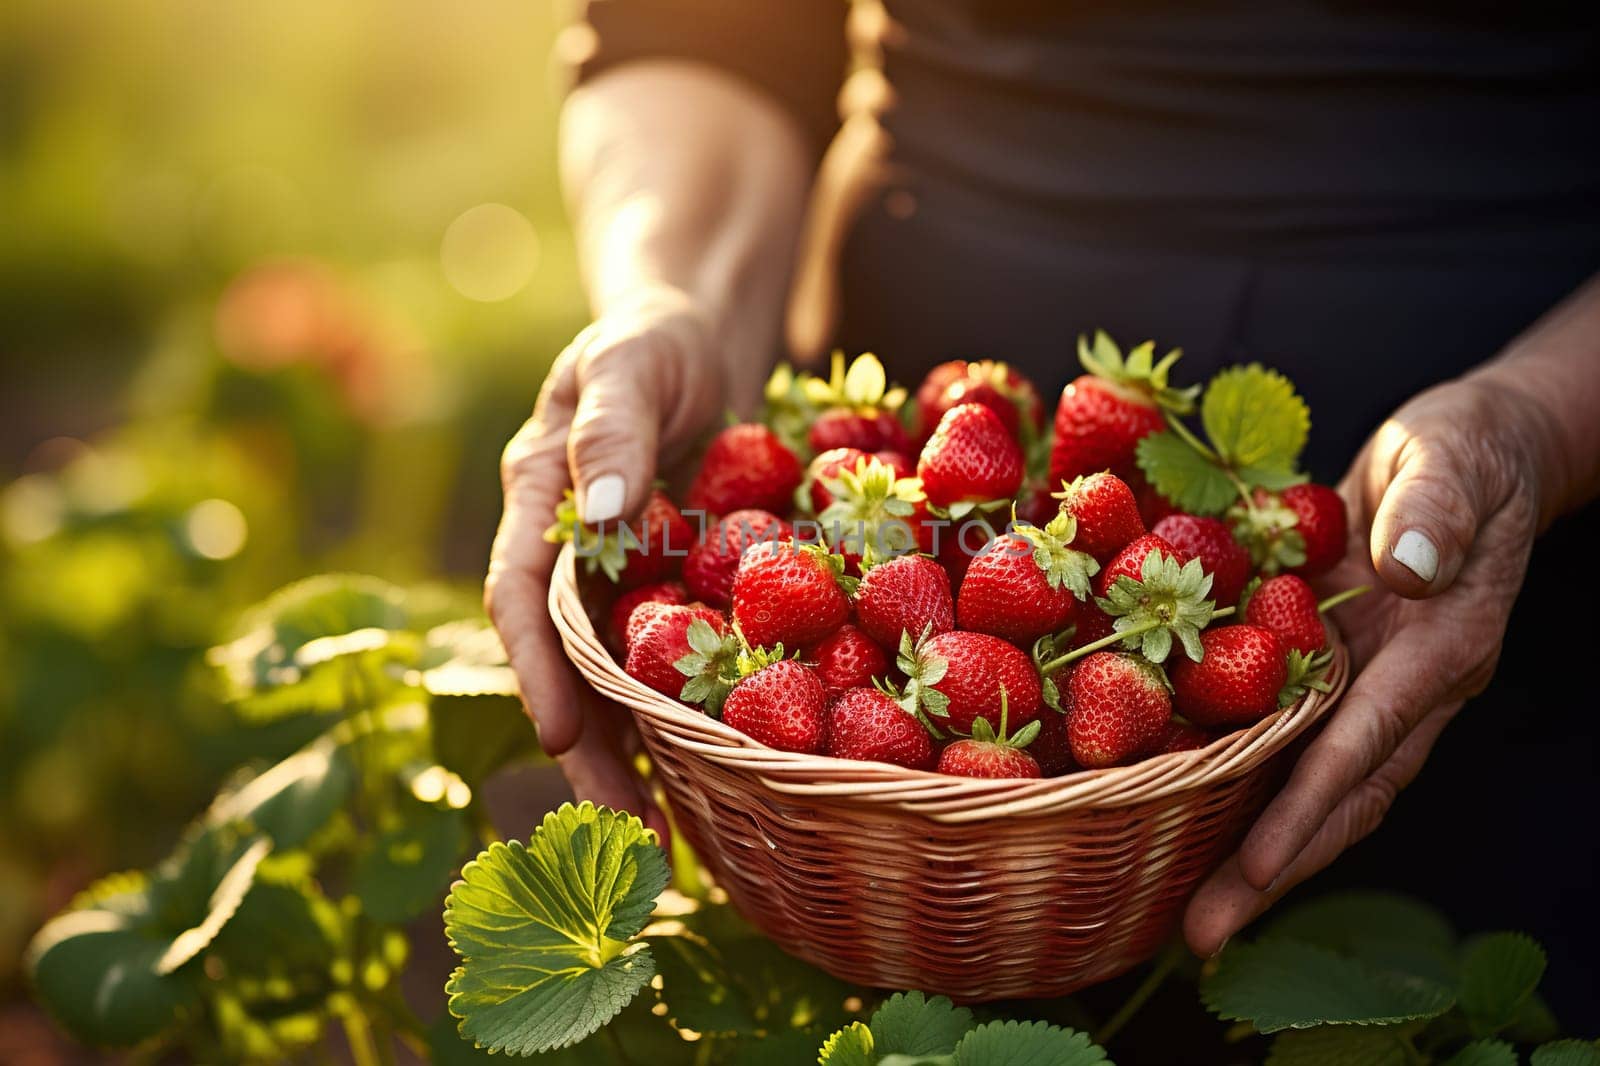 Hands holding a container with strawberries against the background of a green plantation.